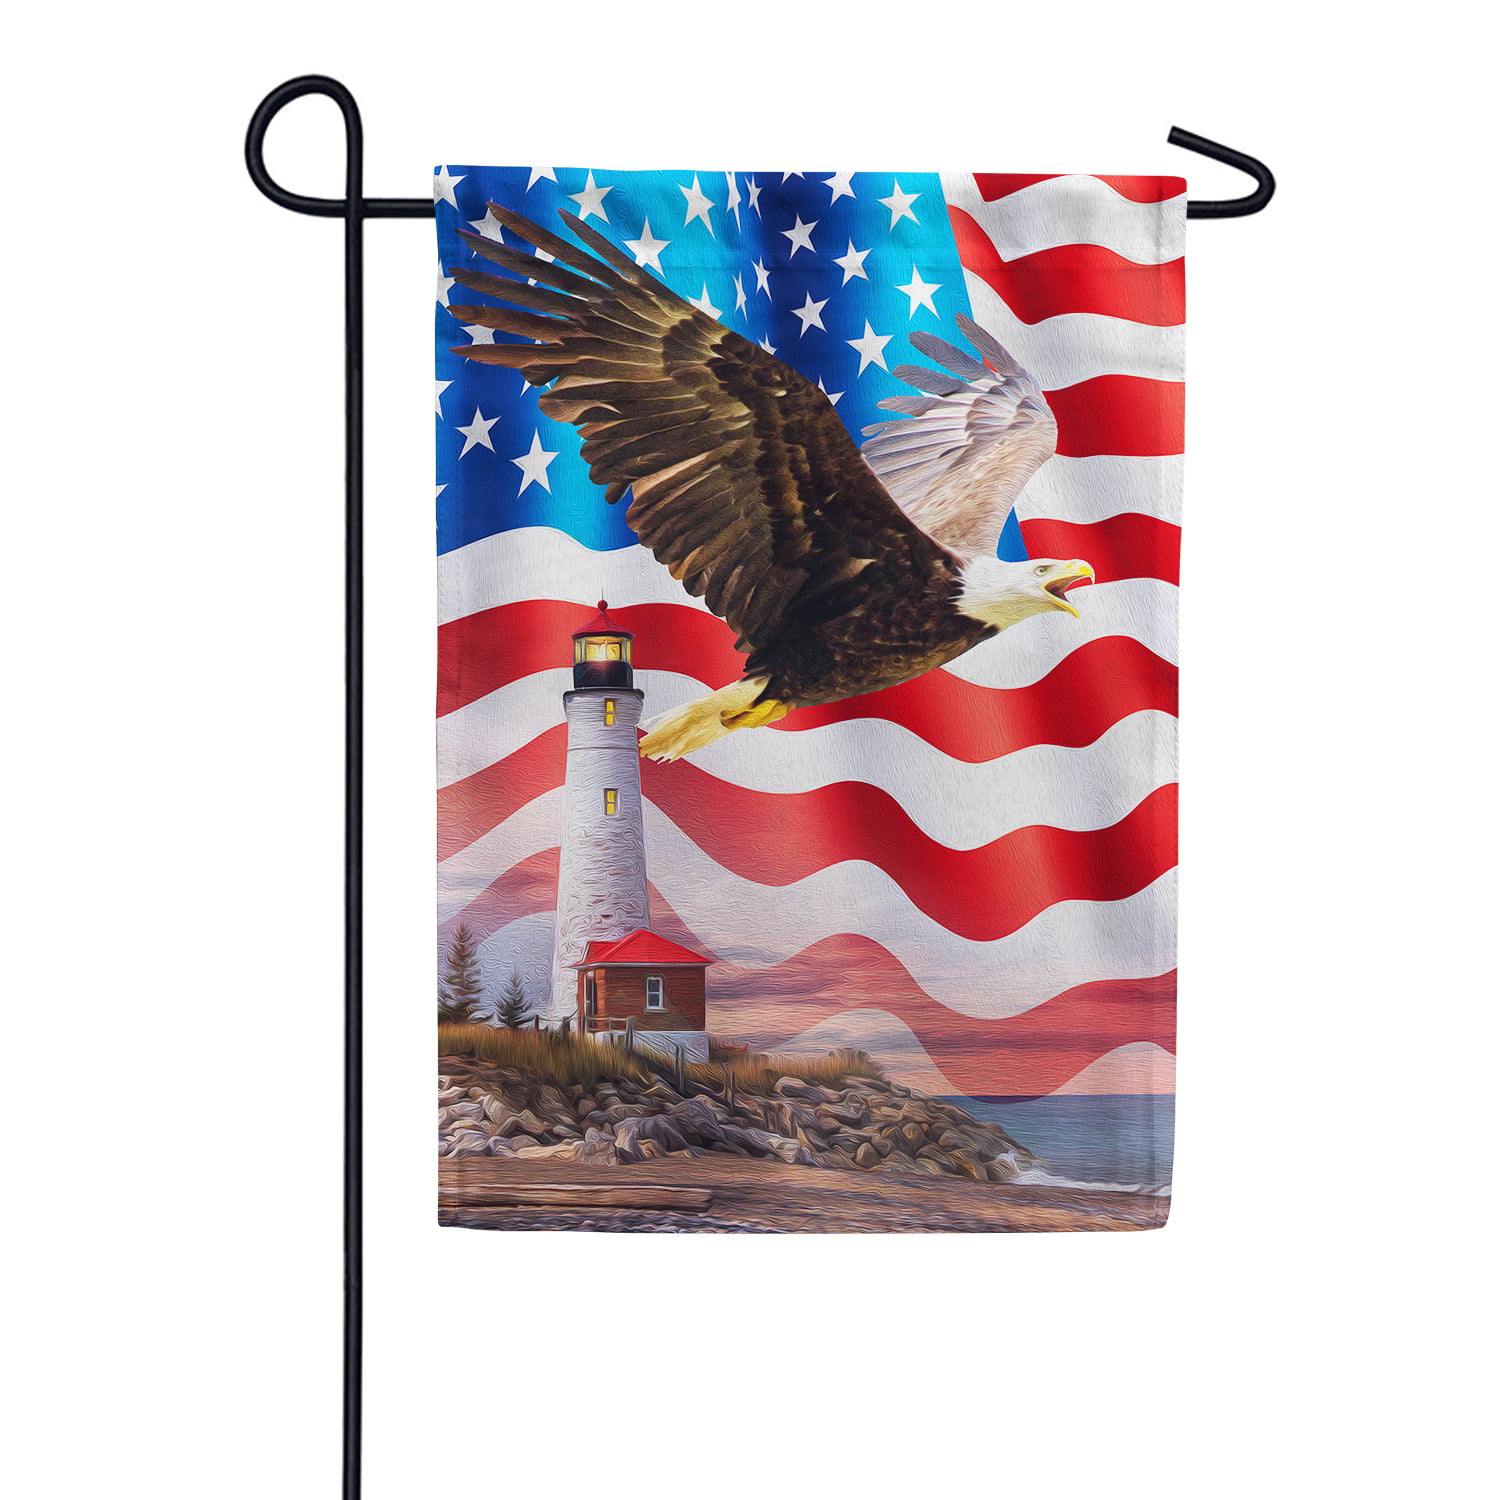 12" x 17" Tin Metal Sign Proud Americans Always Welcome Patriotic Bald Eagle USA 